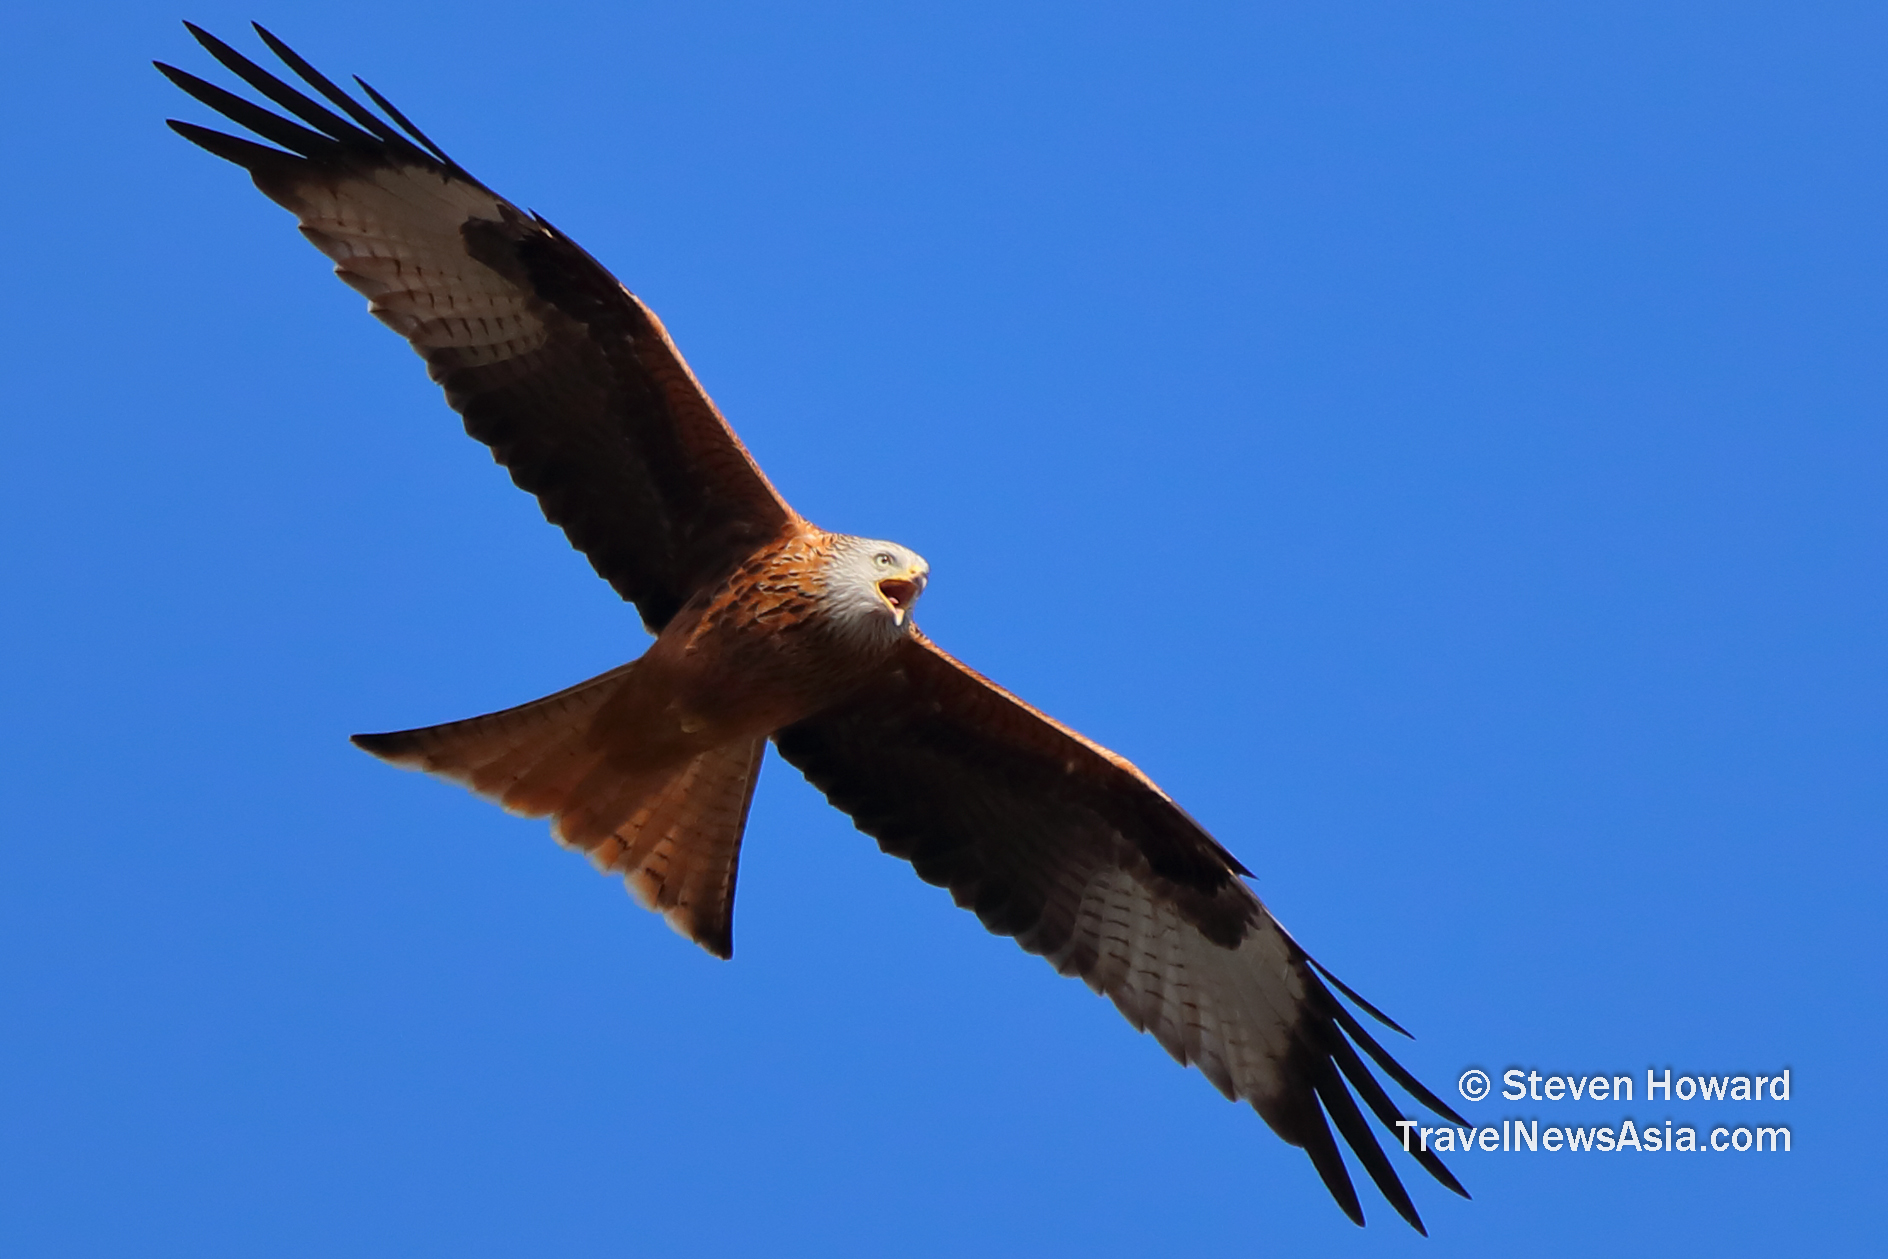 Red Kite. Picture by Steven Howard of TravelNewsAsia.com Click to enlarge.